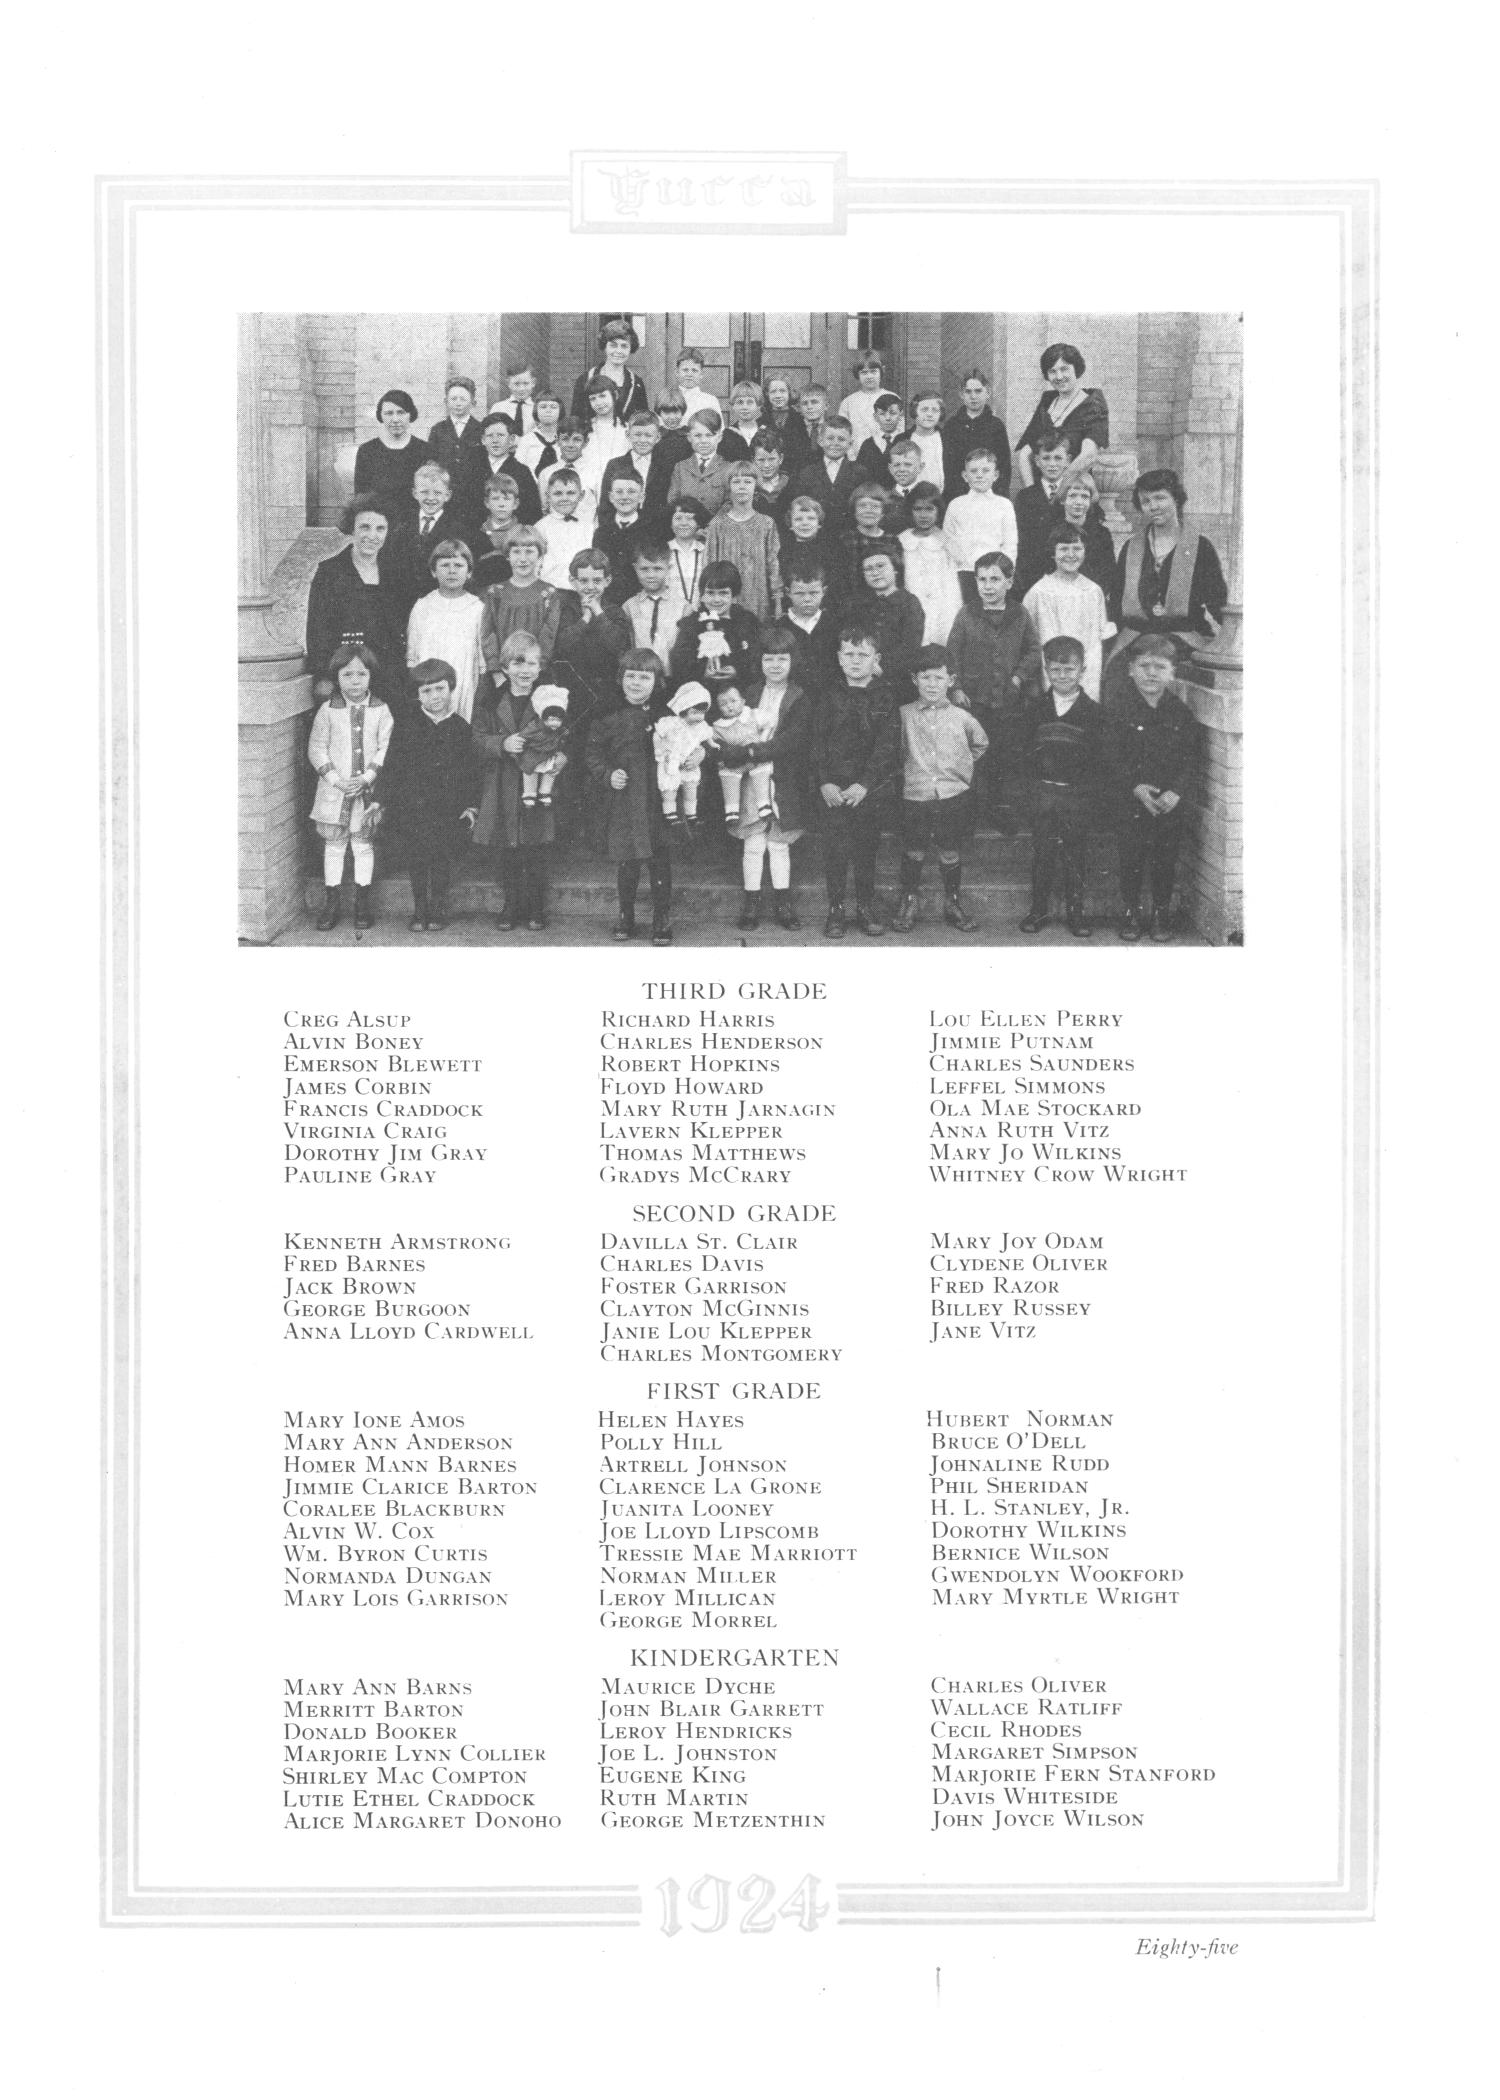 The Yucca, Yearbook of North Texas State Teacher's School, 1924
                                                
                                                    85
                                                